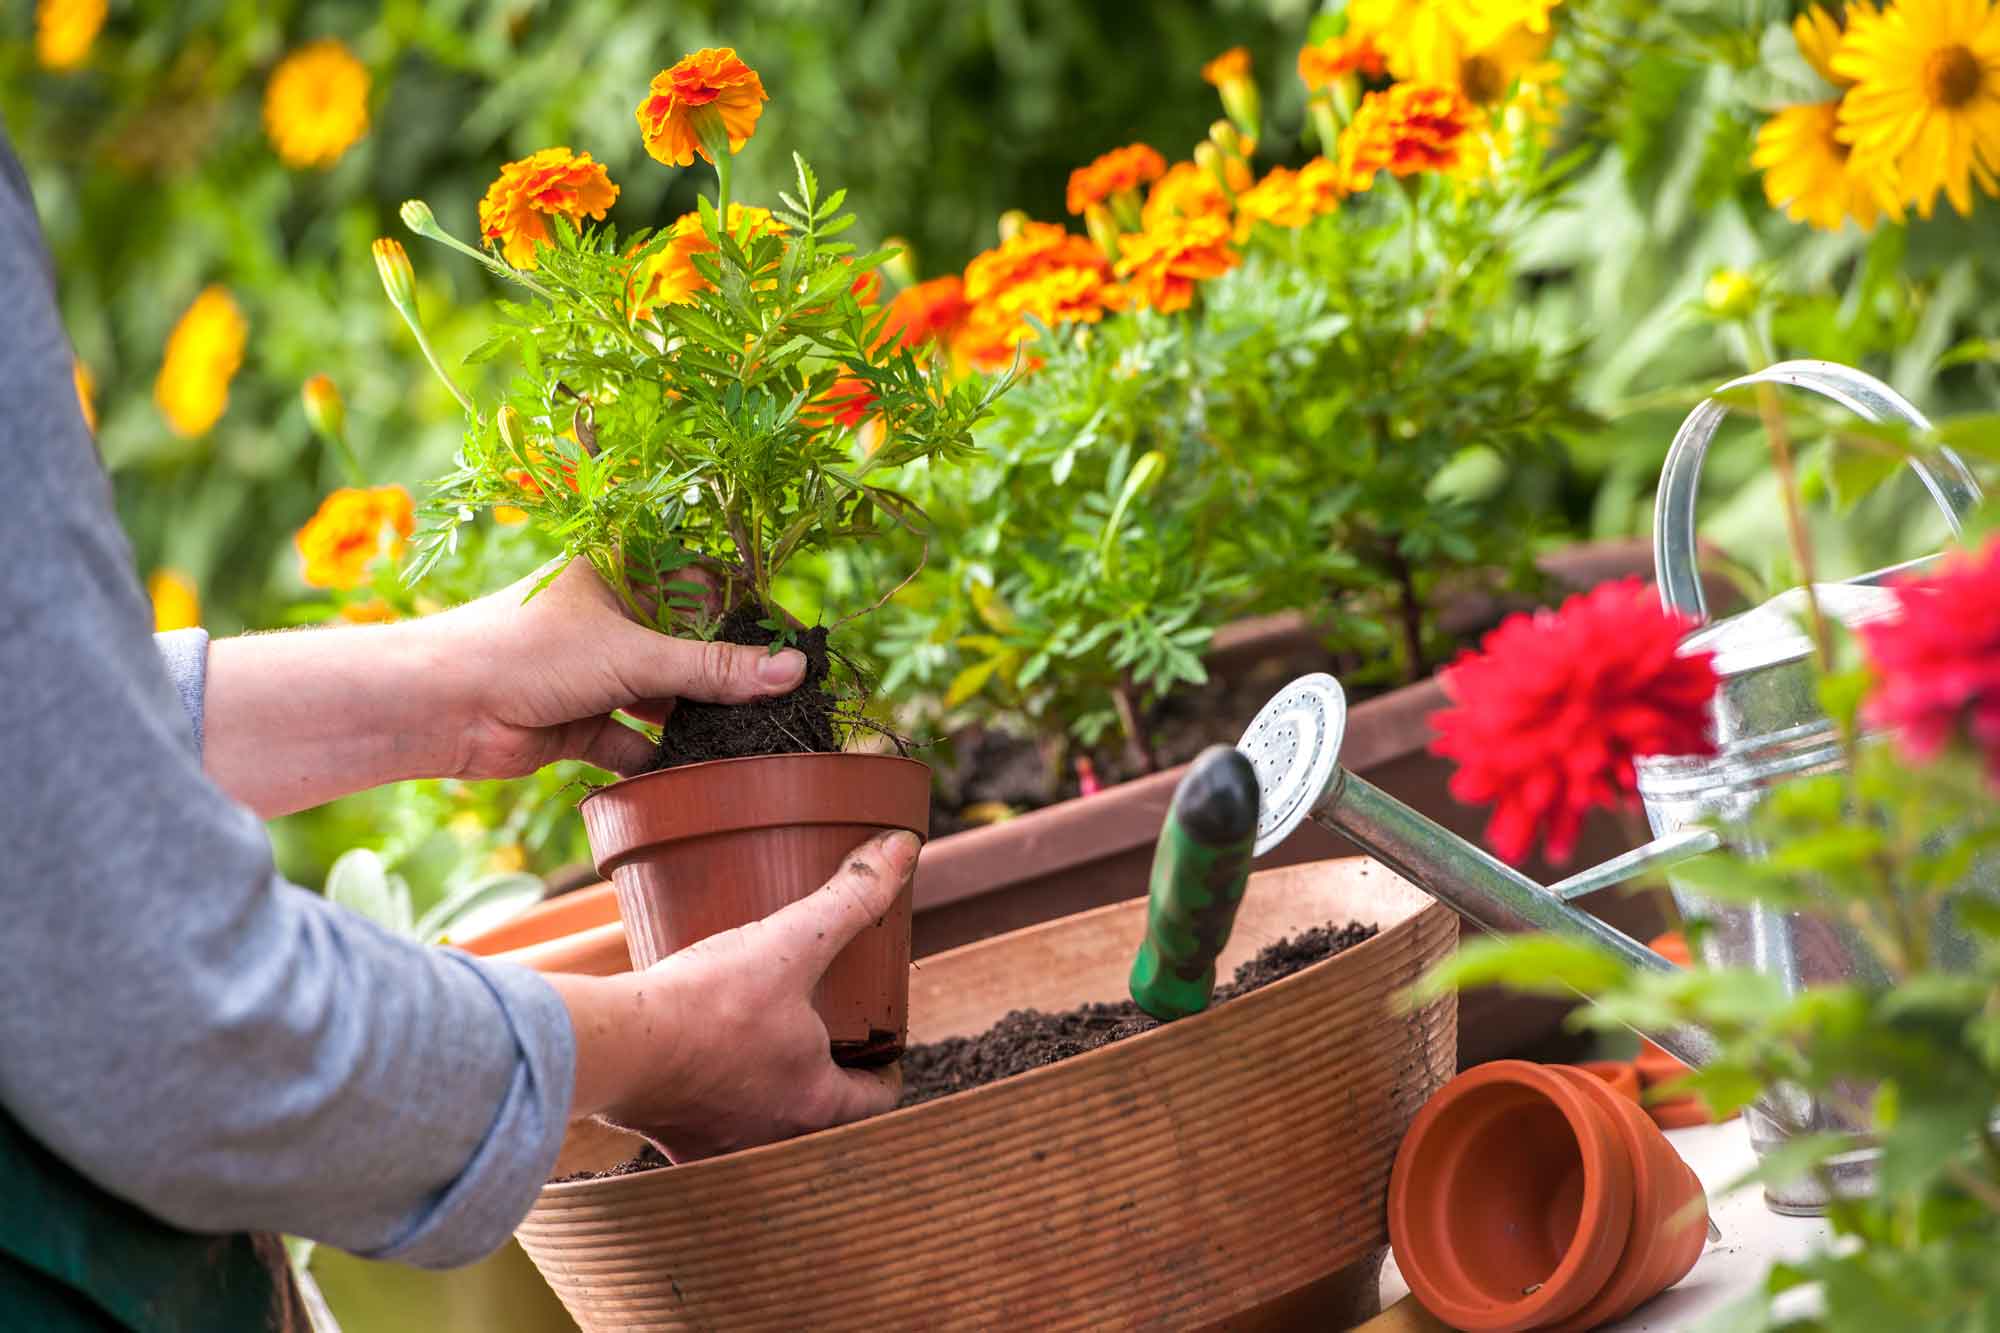 8 Easy Winter Maintenance Tips To Prepare Your Garden To Thrive In Spring